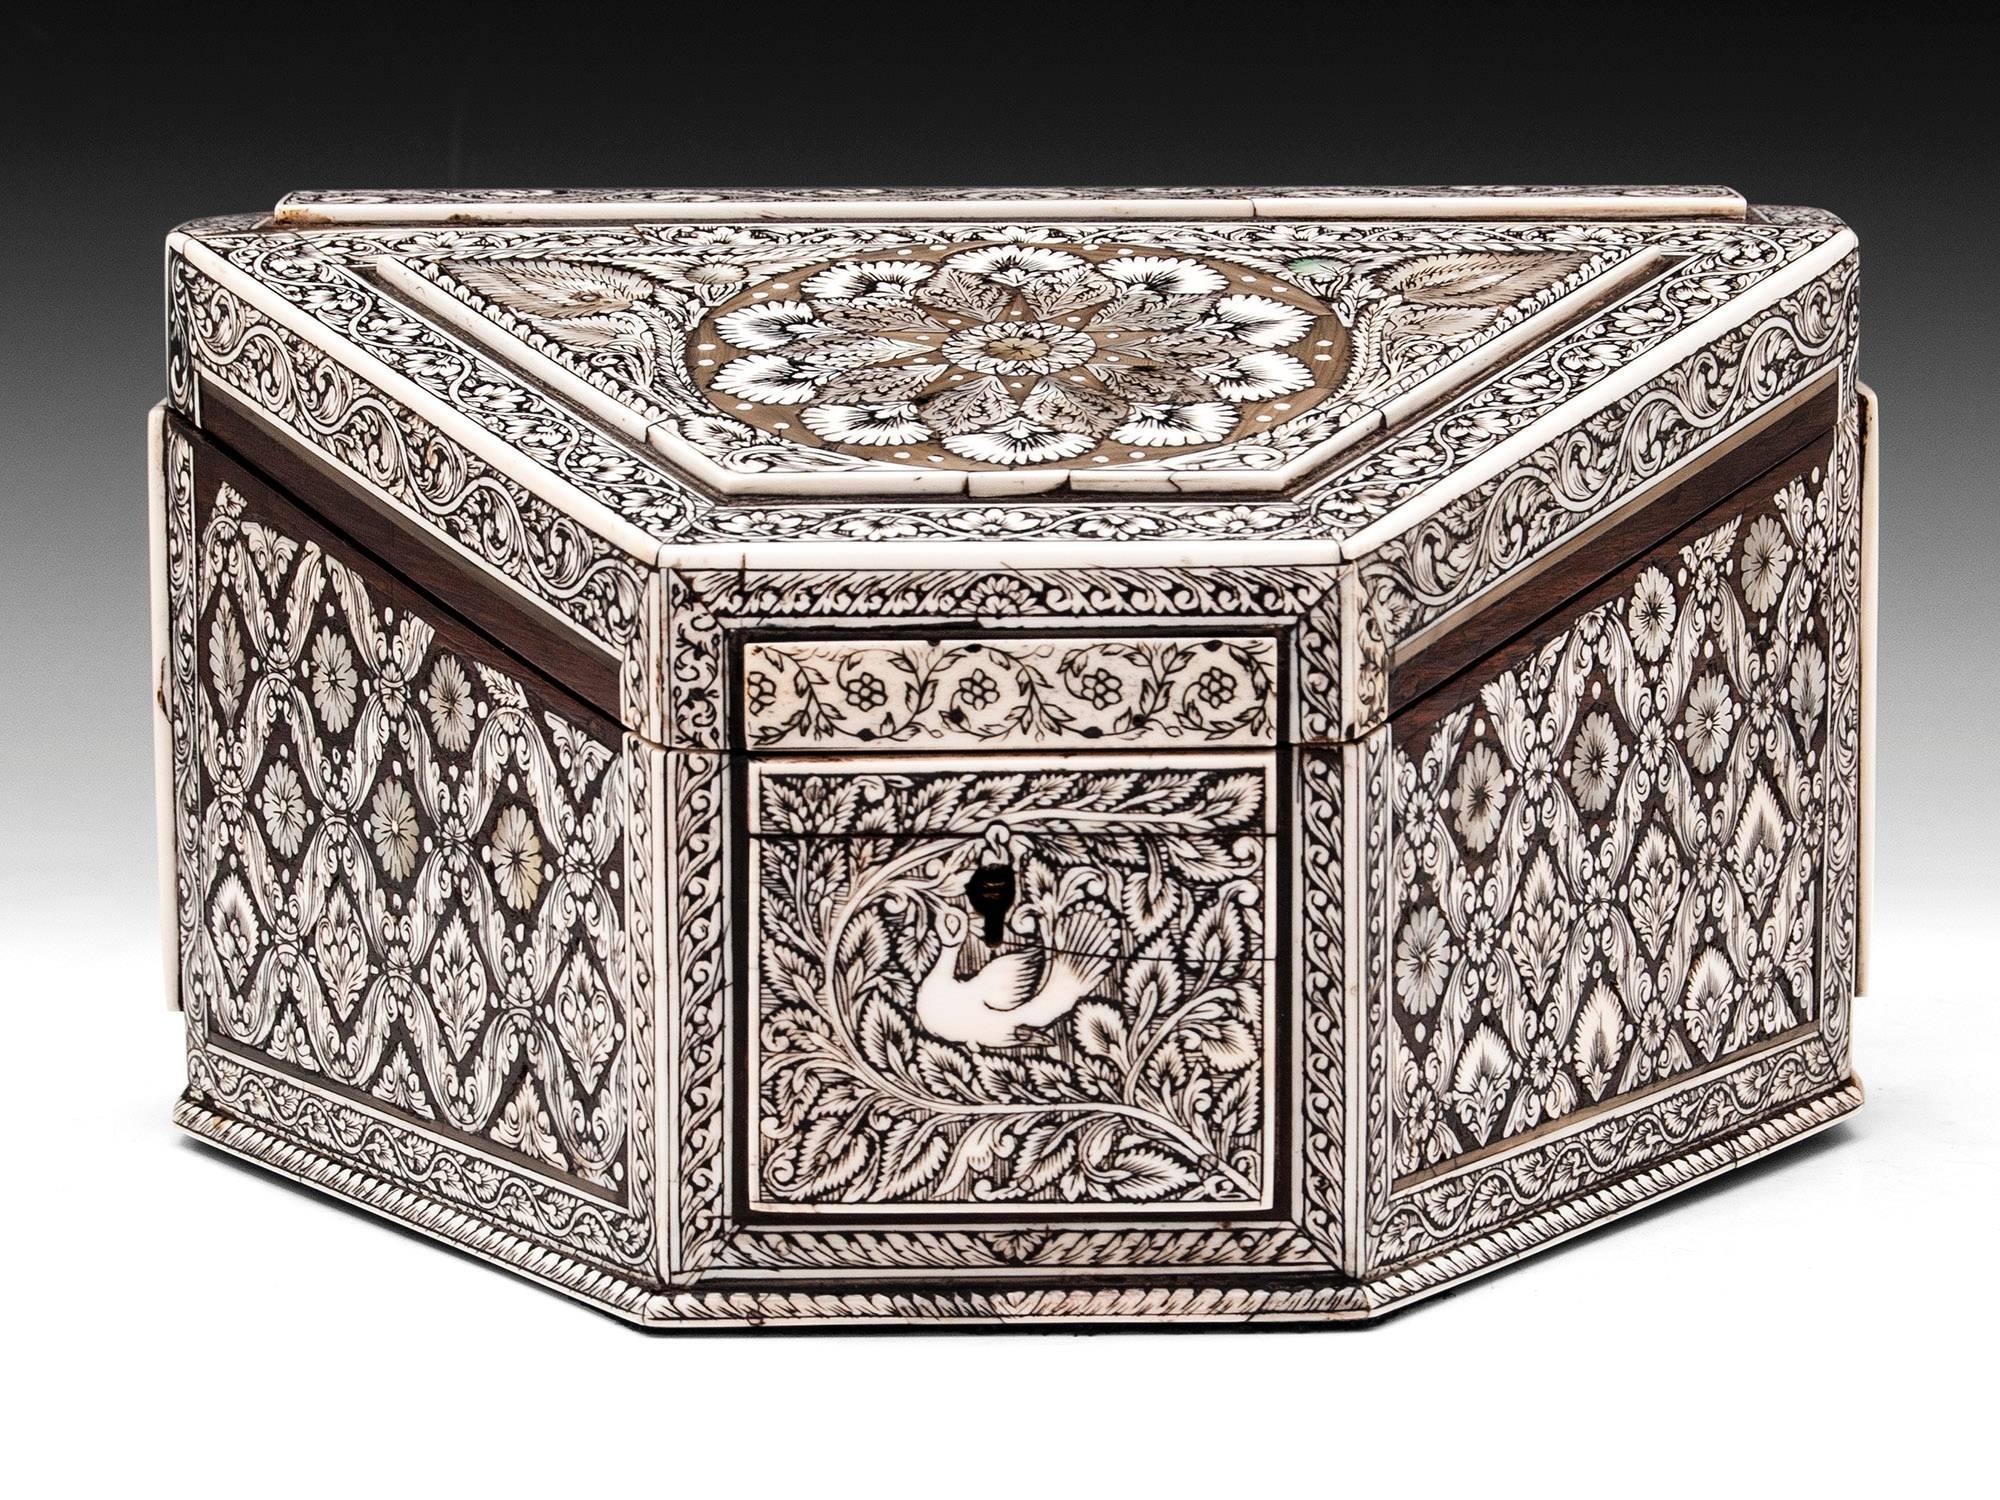 Anglo-Indian ivory Vizagapatam stationery box made of padouk and buffalo horn. Decorated with engraved and lac filled flowing floral patterns with a large symmetrical flower design on the top highlighted by mother-of-pearl inlays. The sides, front